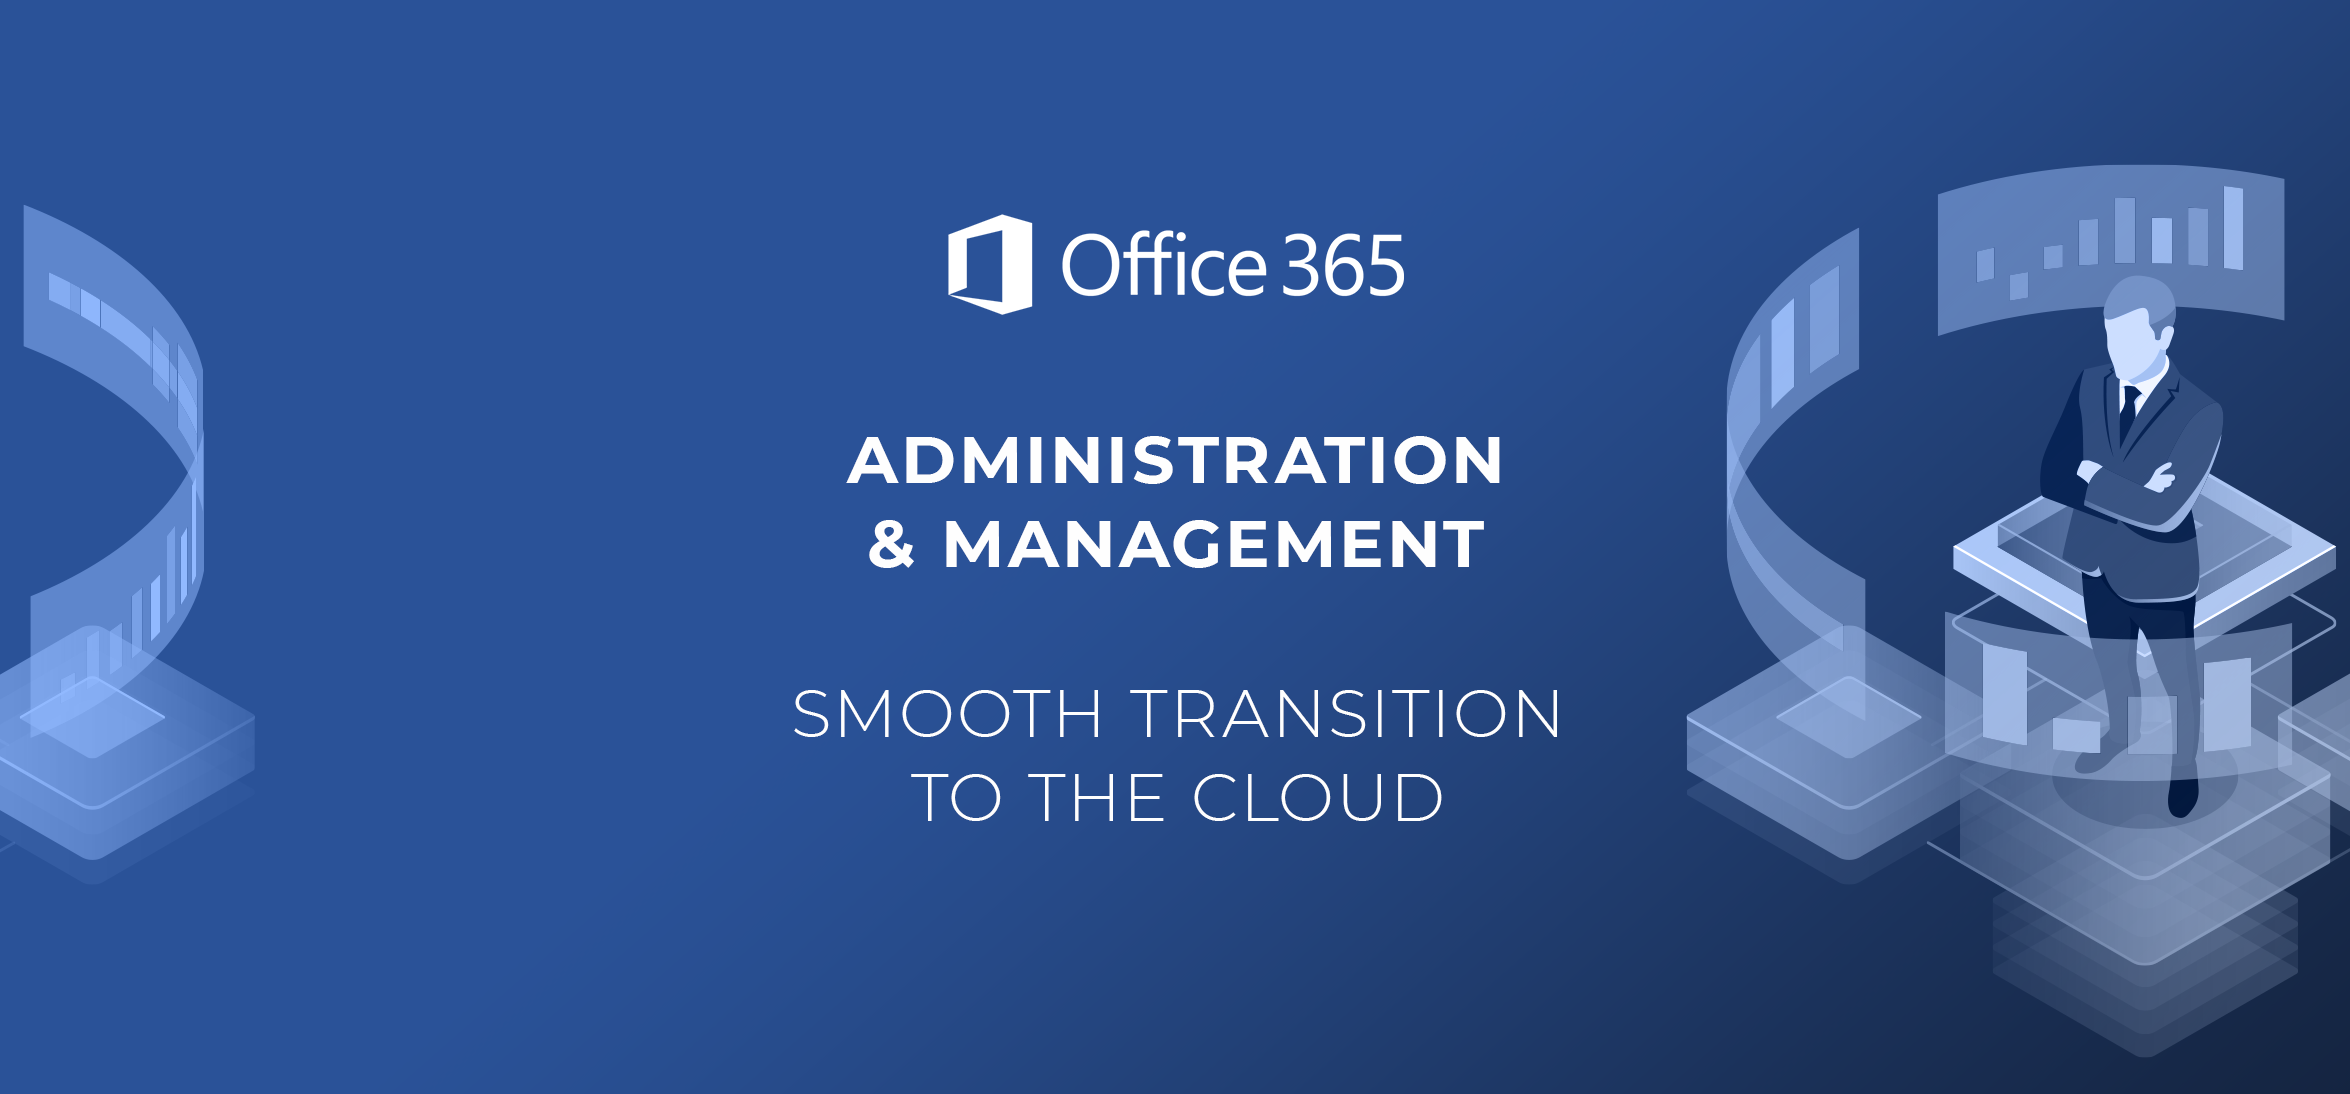 Microsoft Office 365 Administration Services in Encinitas CA, 92024